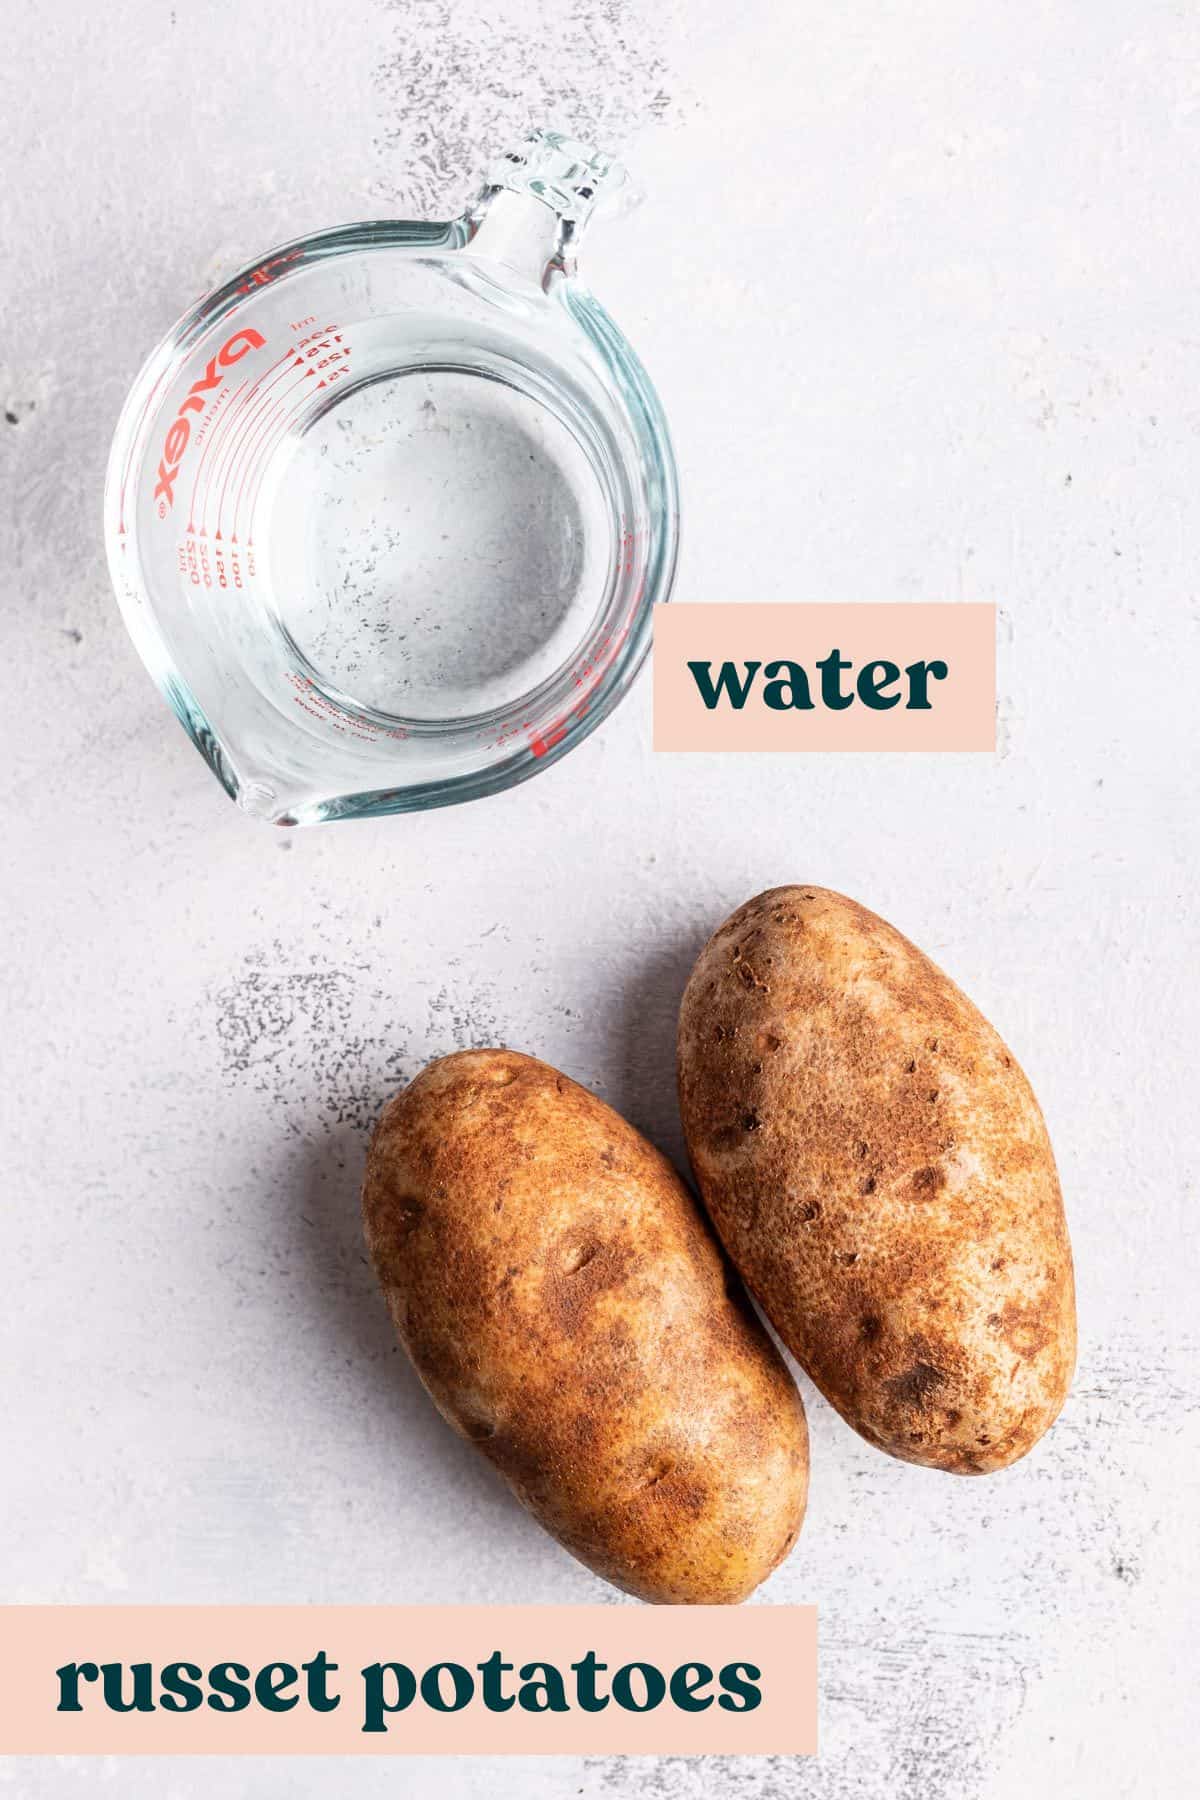 Potatoes and water with labels.